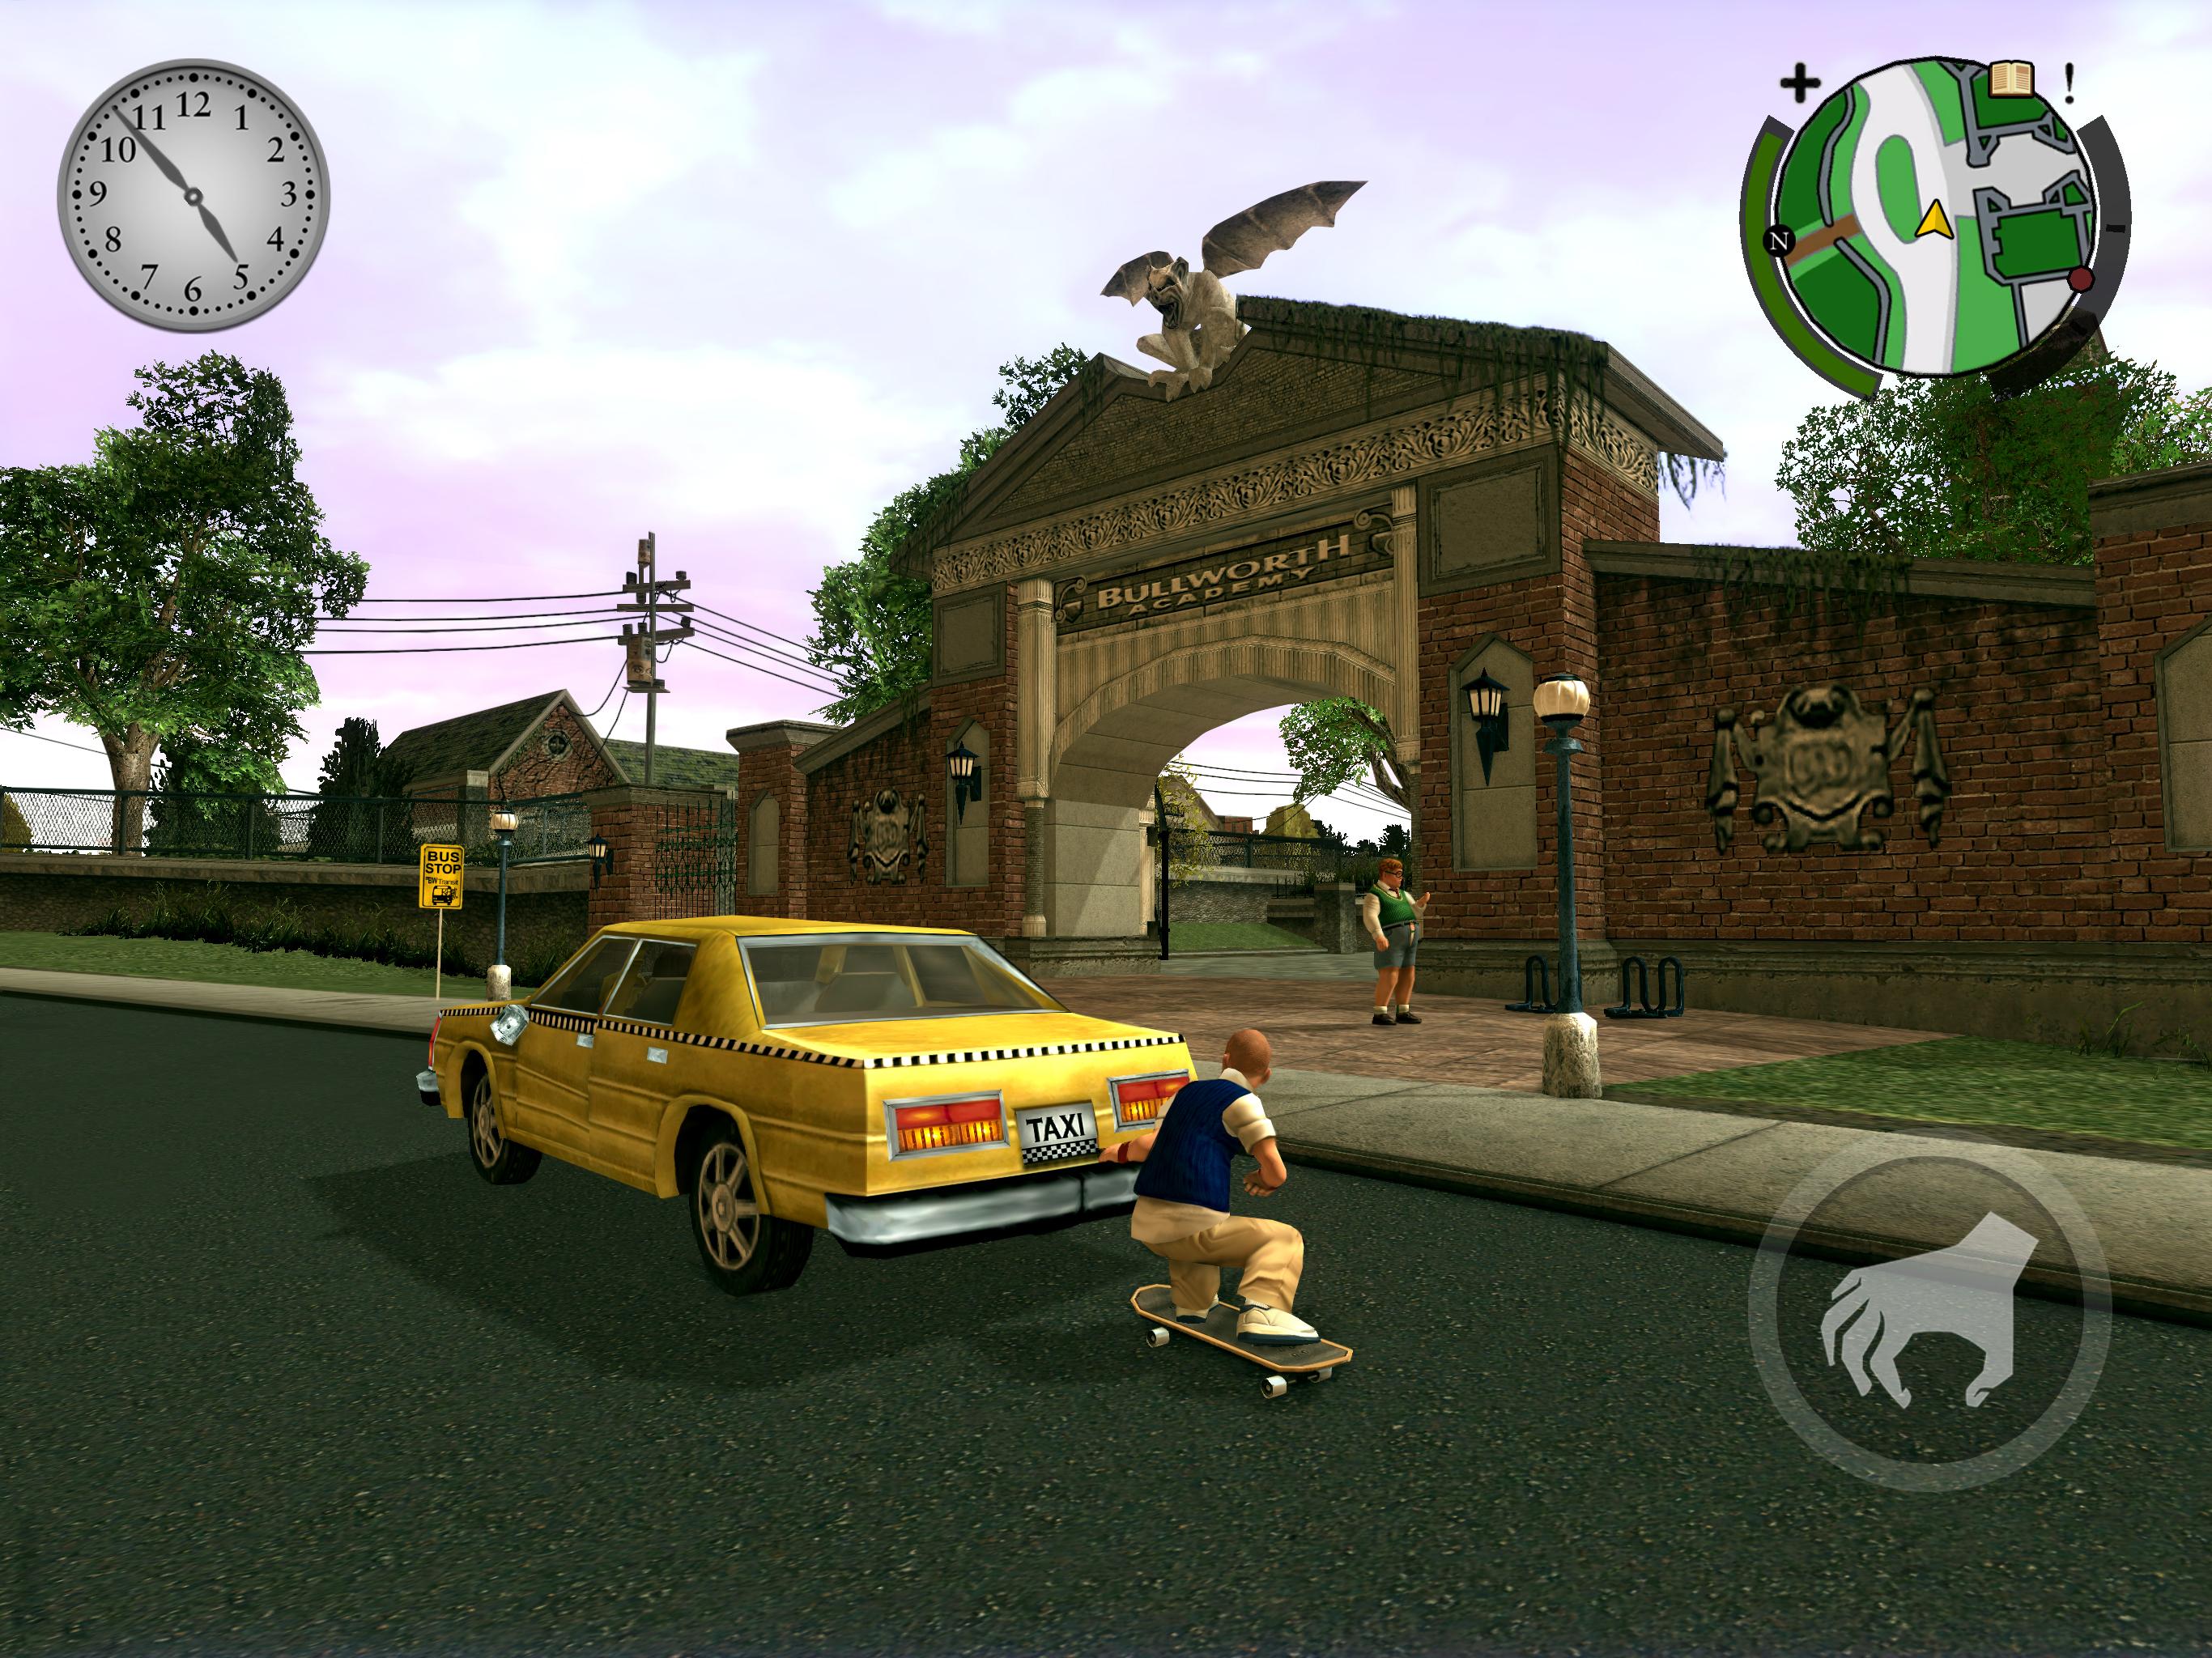 Download & Play Bully: Anniversary Edition on PC with NoxPlayer - Appcenter